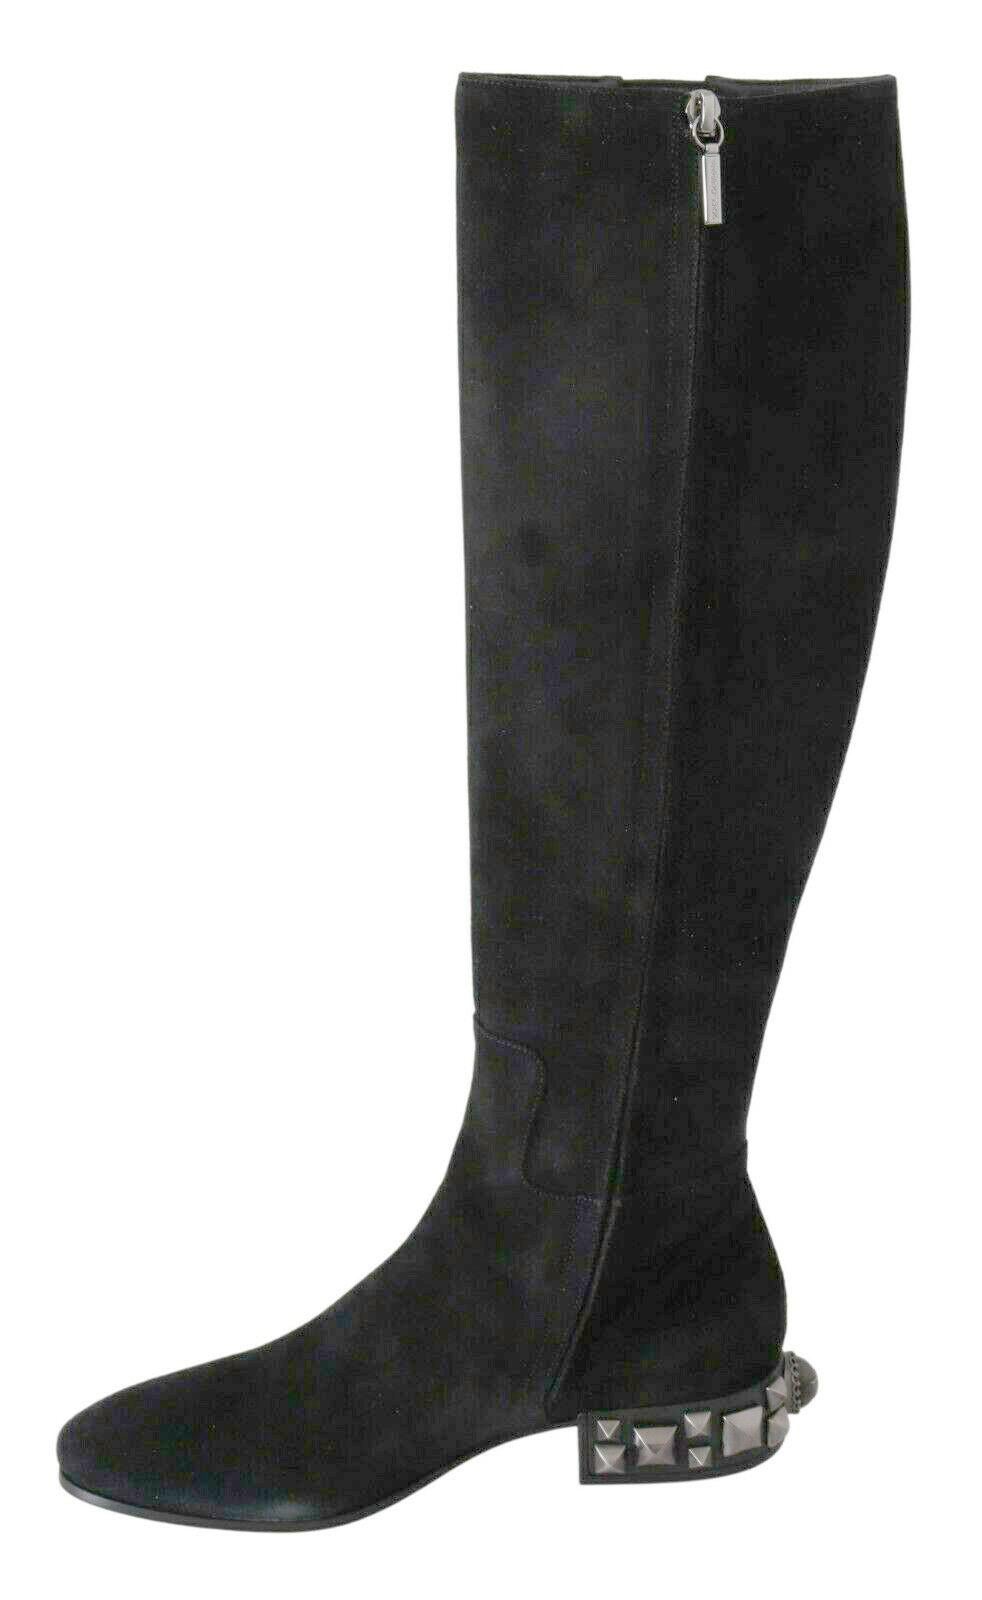 Gorgeous brand new with tags, 100% Authentic Dolce & Gabbana knee high boots crafted suede leather with embellishment on the soles.

Model: Knee high flat heels boots

Color: Black 
Material: 100% Suede

Sole: Rubber and leather
Stretch band on the